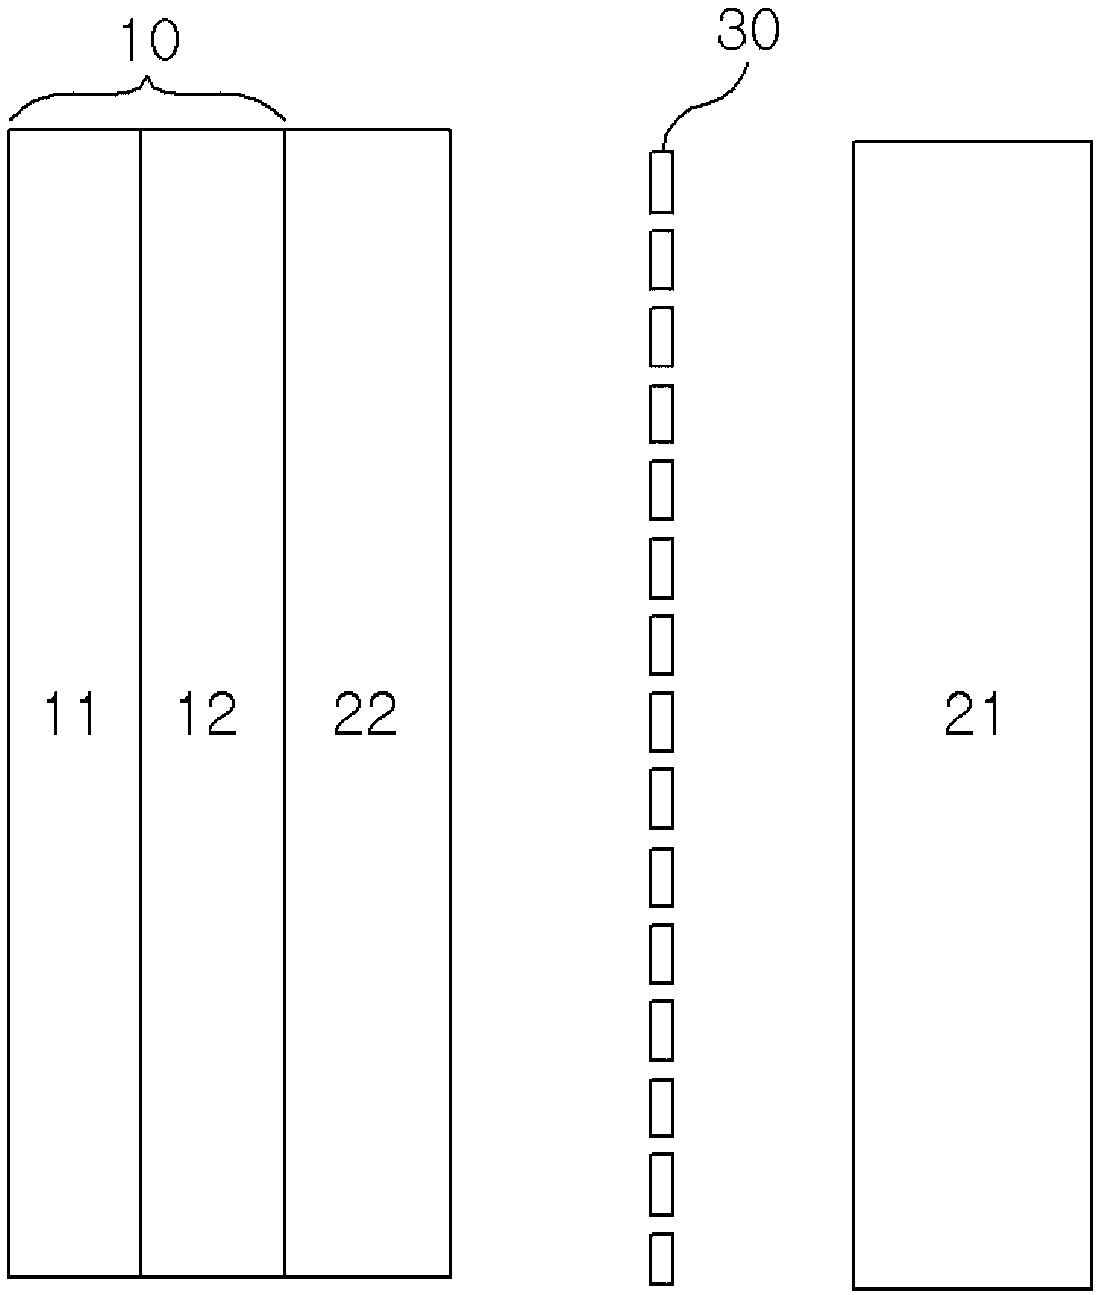 Lithium secondary battery having lithium metal formed on anode and manufacturing method therefor